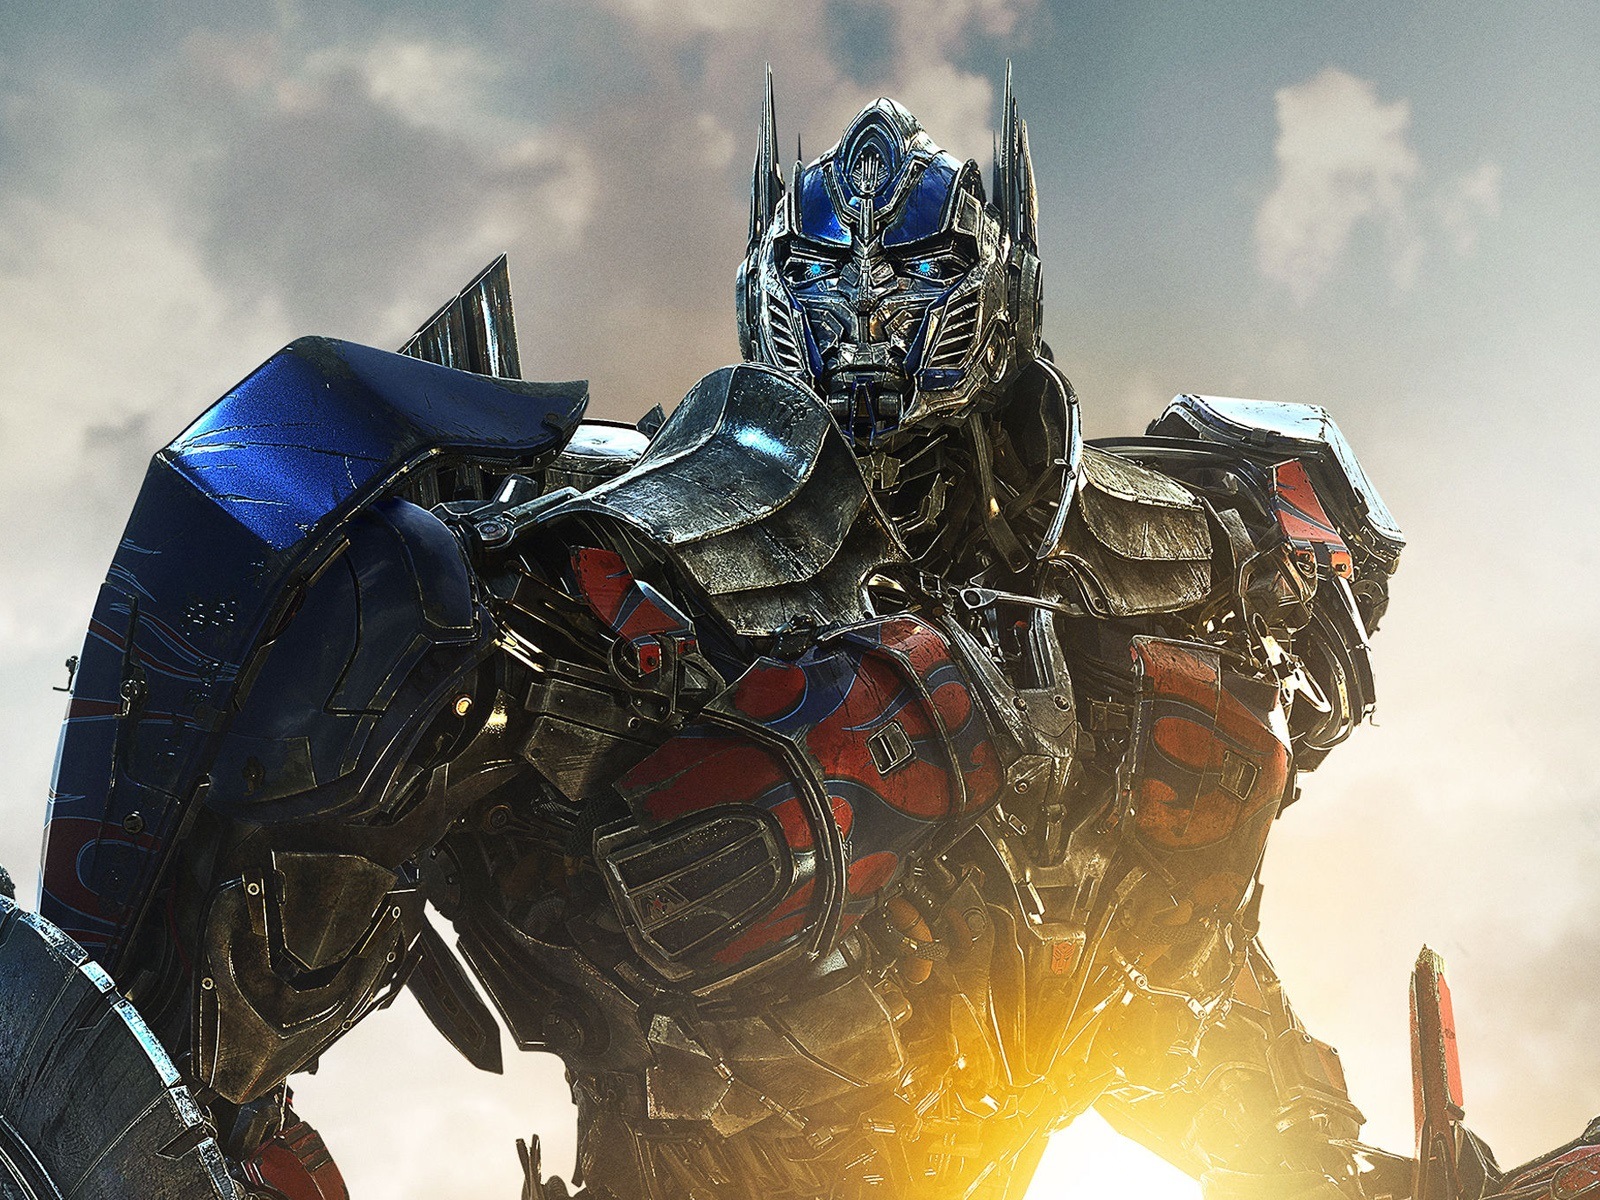 2014 Transformers: Age of Extinction HD wallpapers #2 - 1600x1200